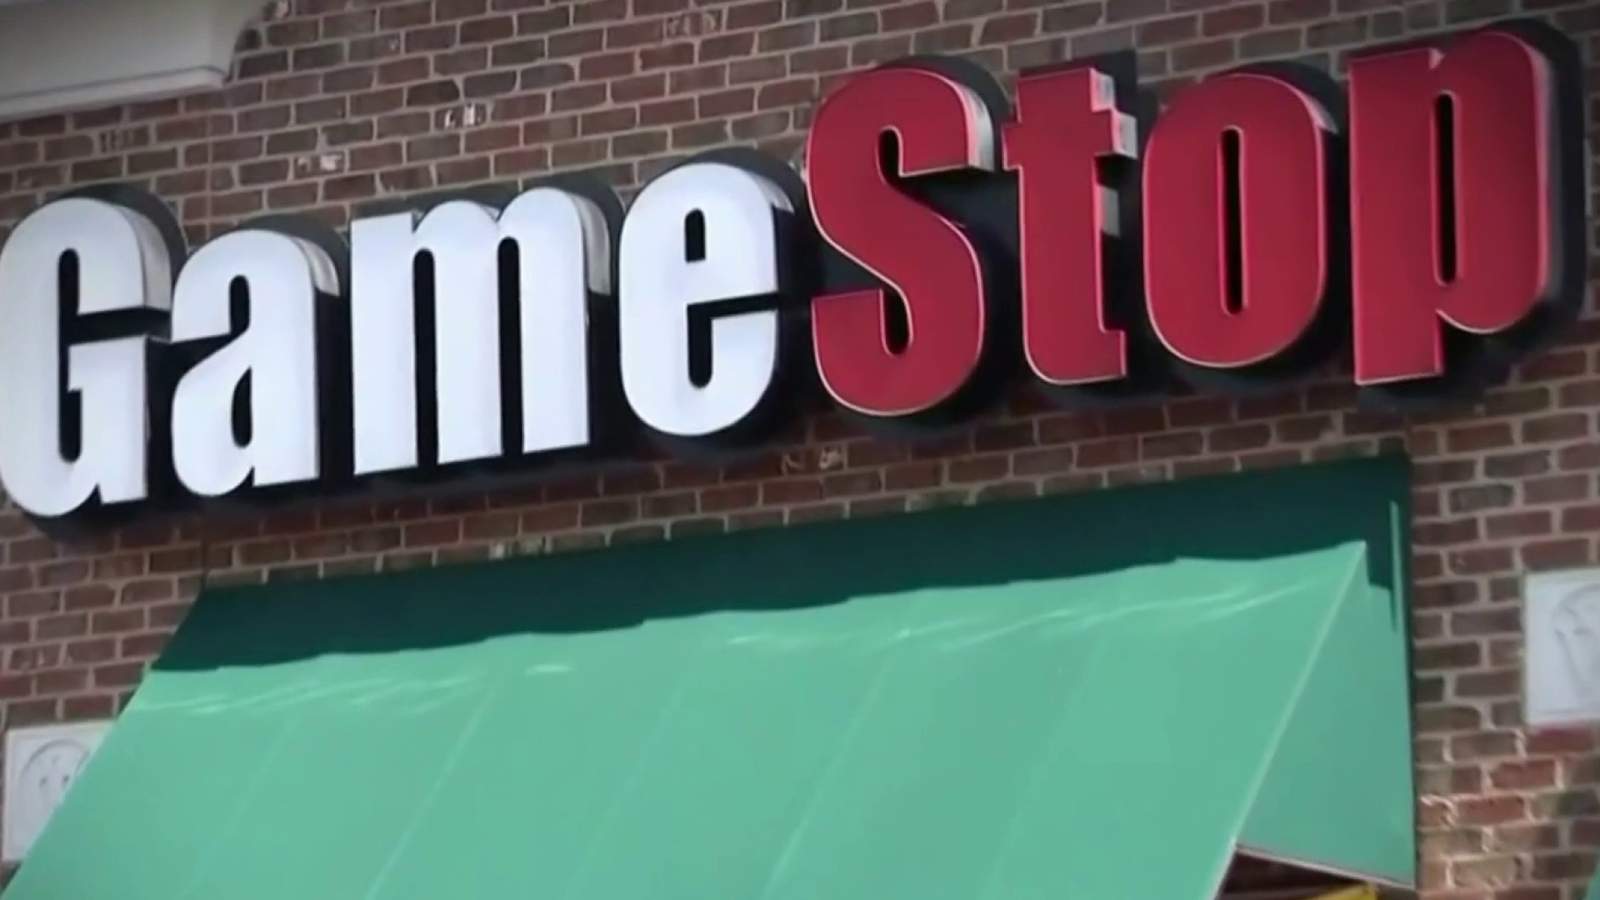 EXPLAINER: Why GameStop’s stock surge is shaking Wall Street